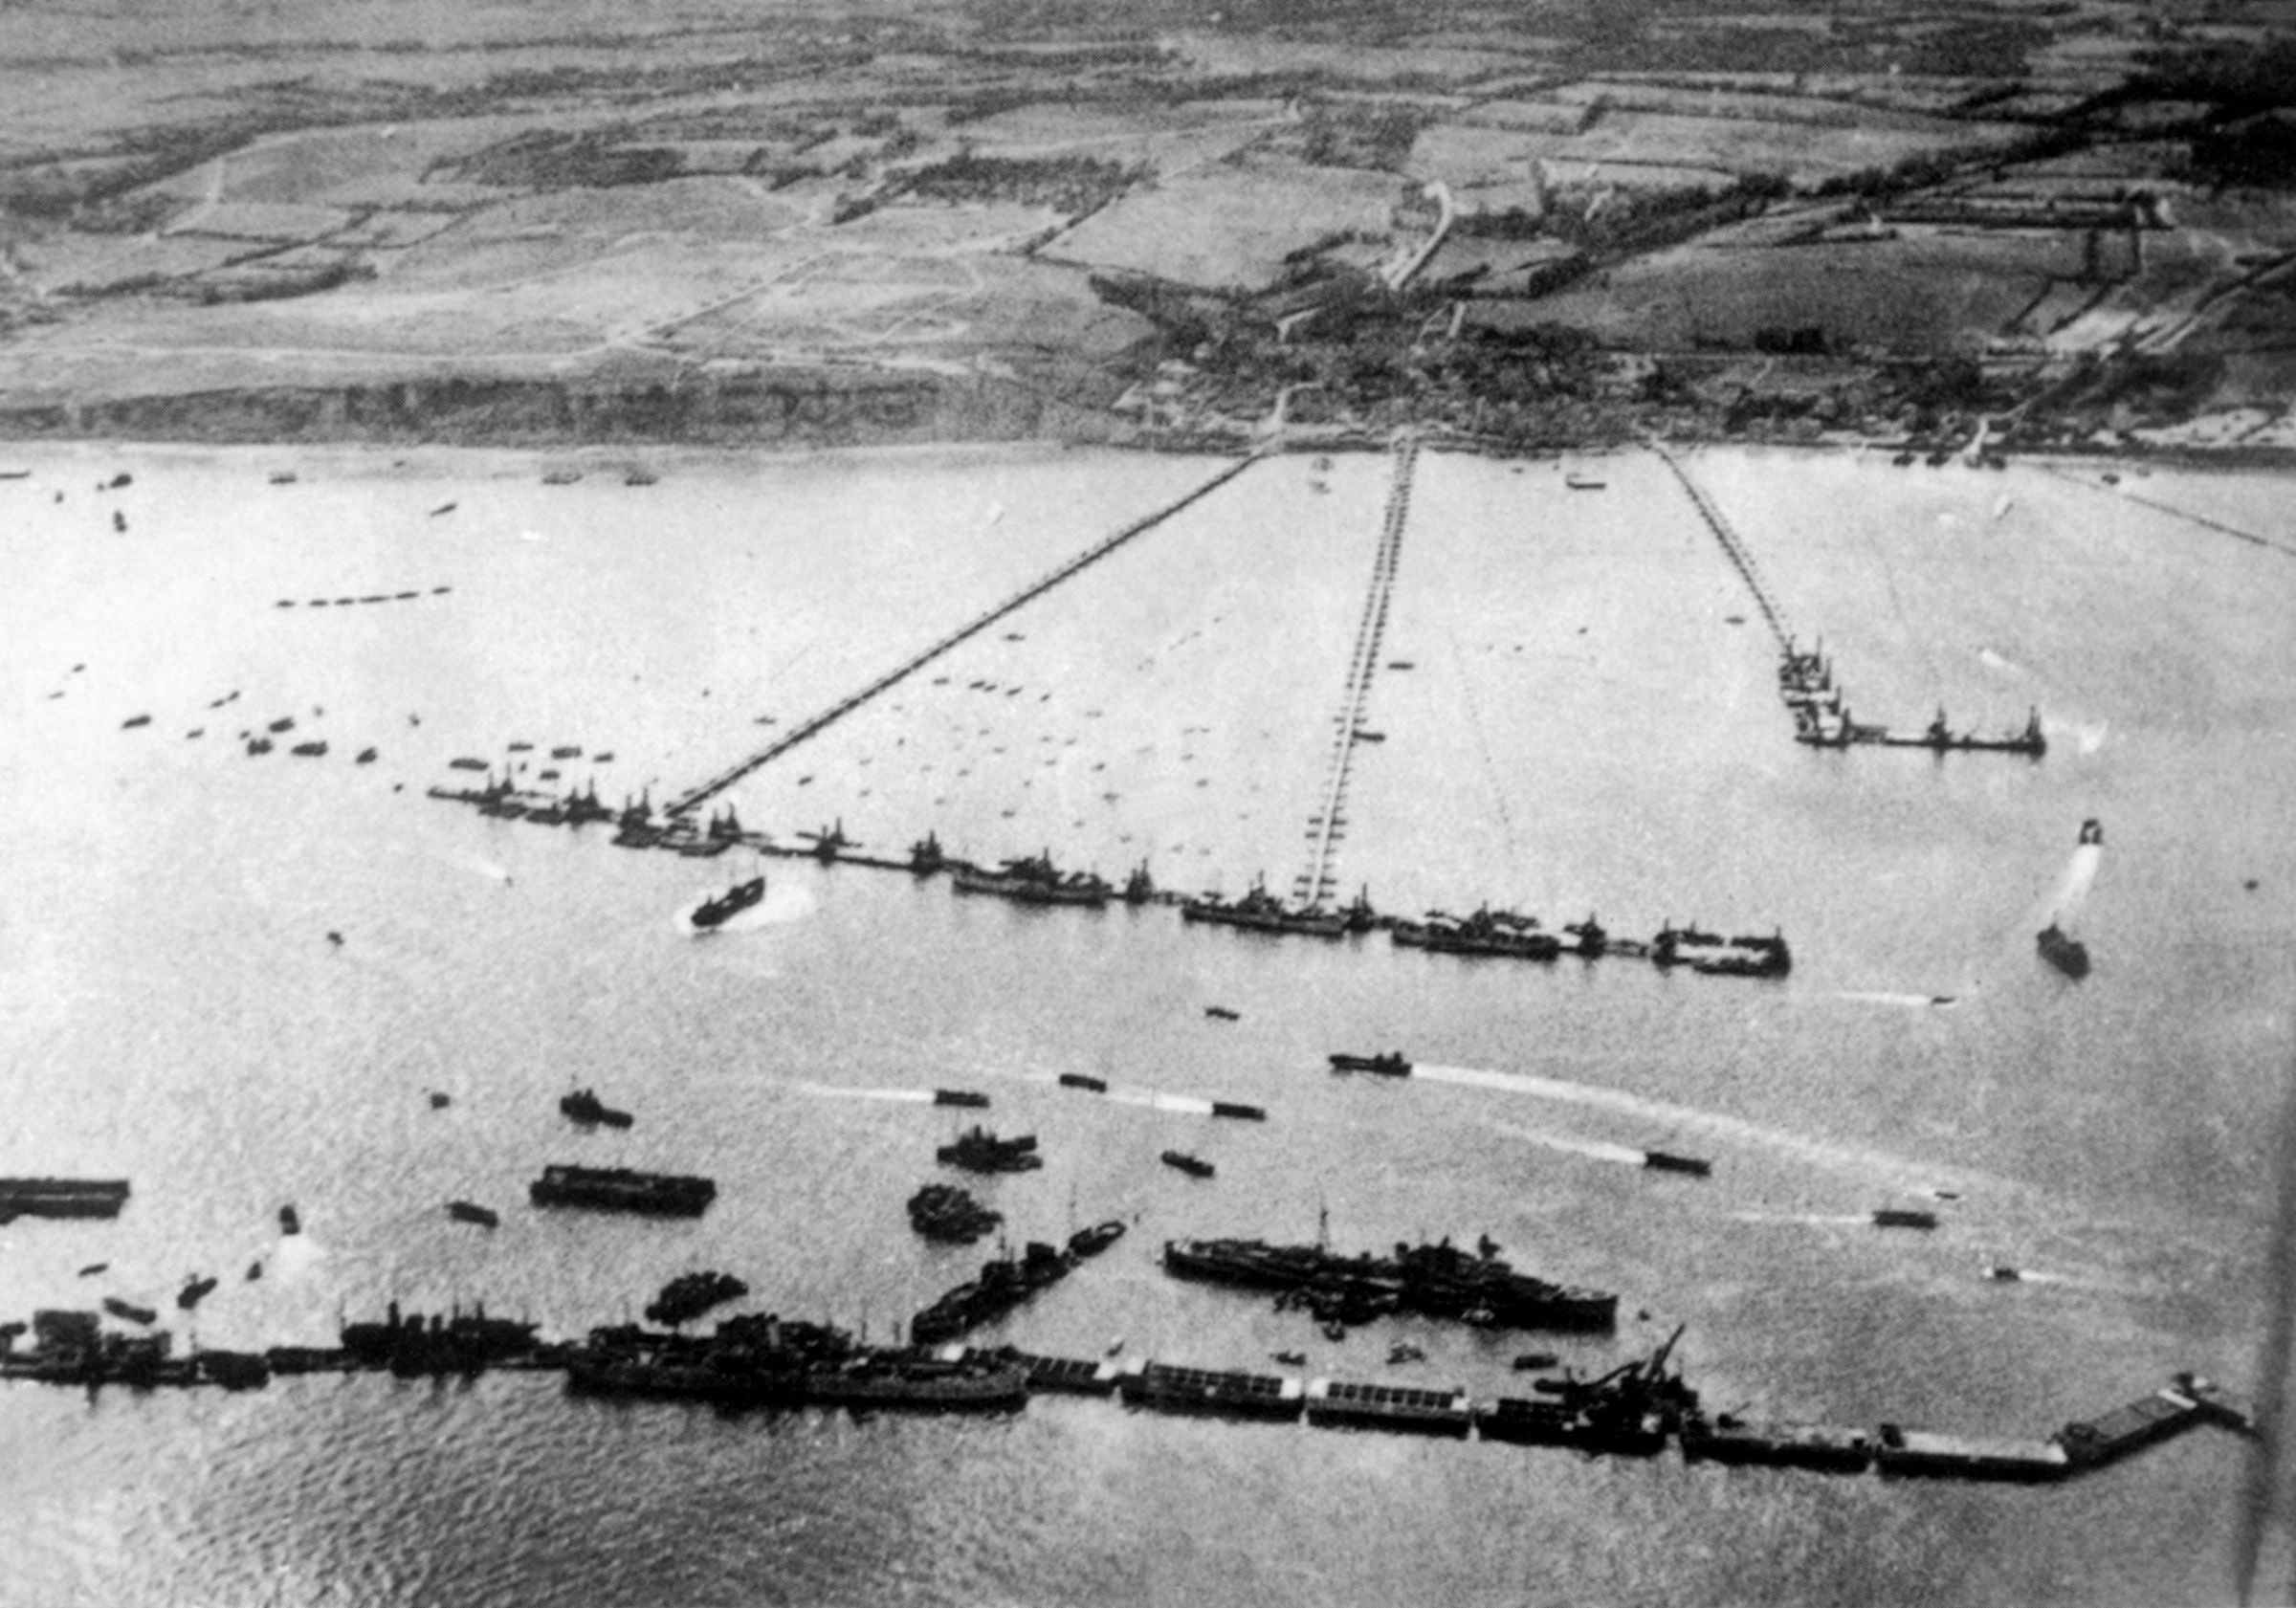 Shown deployed along a Normandy invasion beach, this Mulberry artificial harbor allowed supplies and reinforcements to be offloaded in support of the Allied landings which took place on June 6, 1944.  This aerial view provides a perspective of the size of the massive structure.